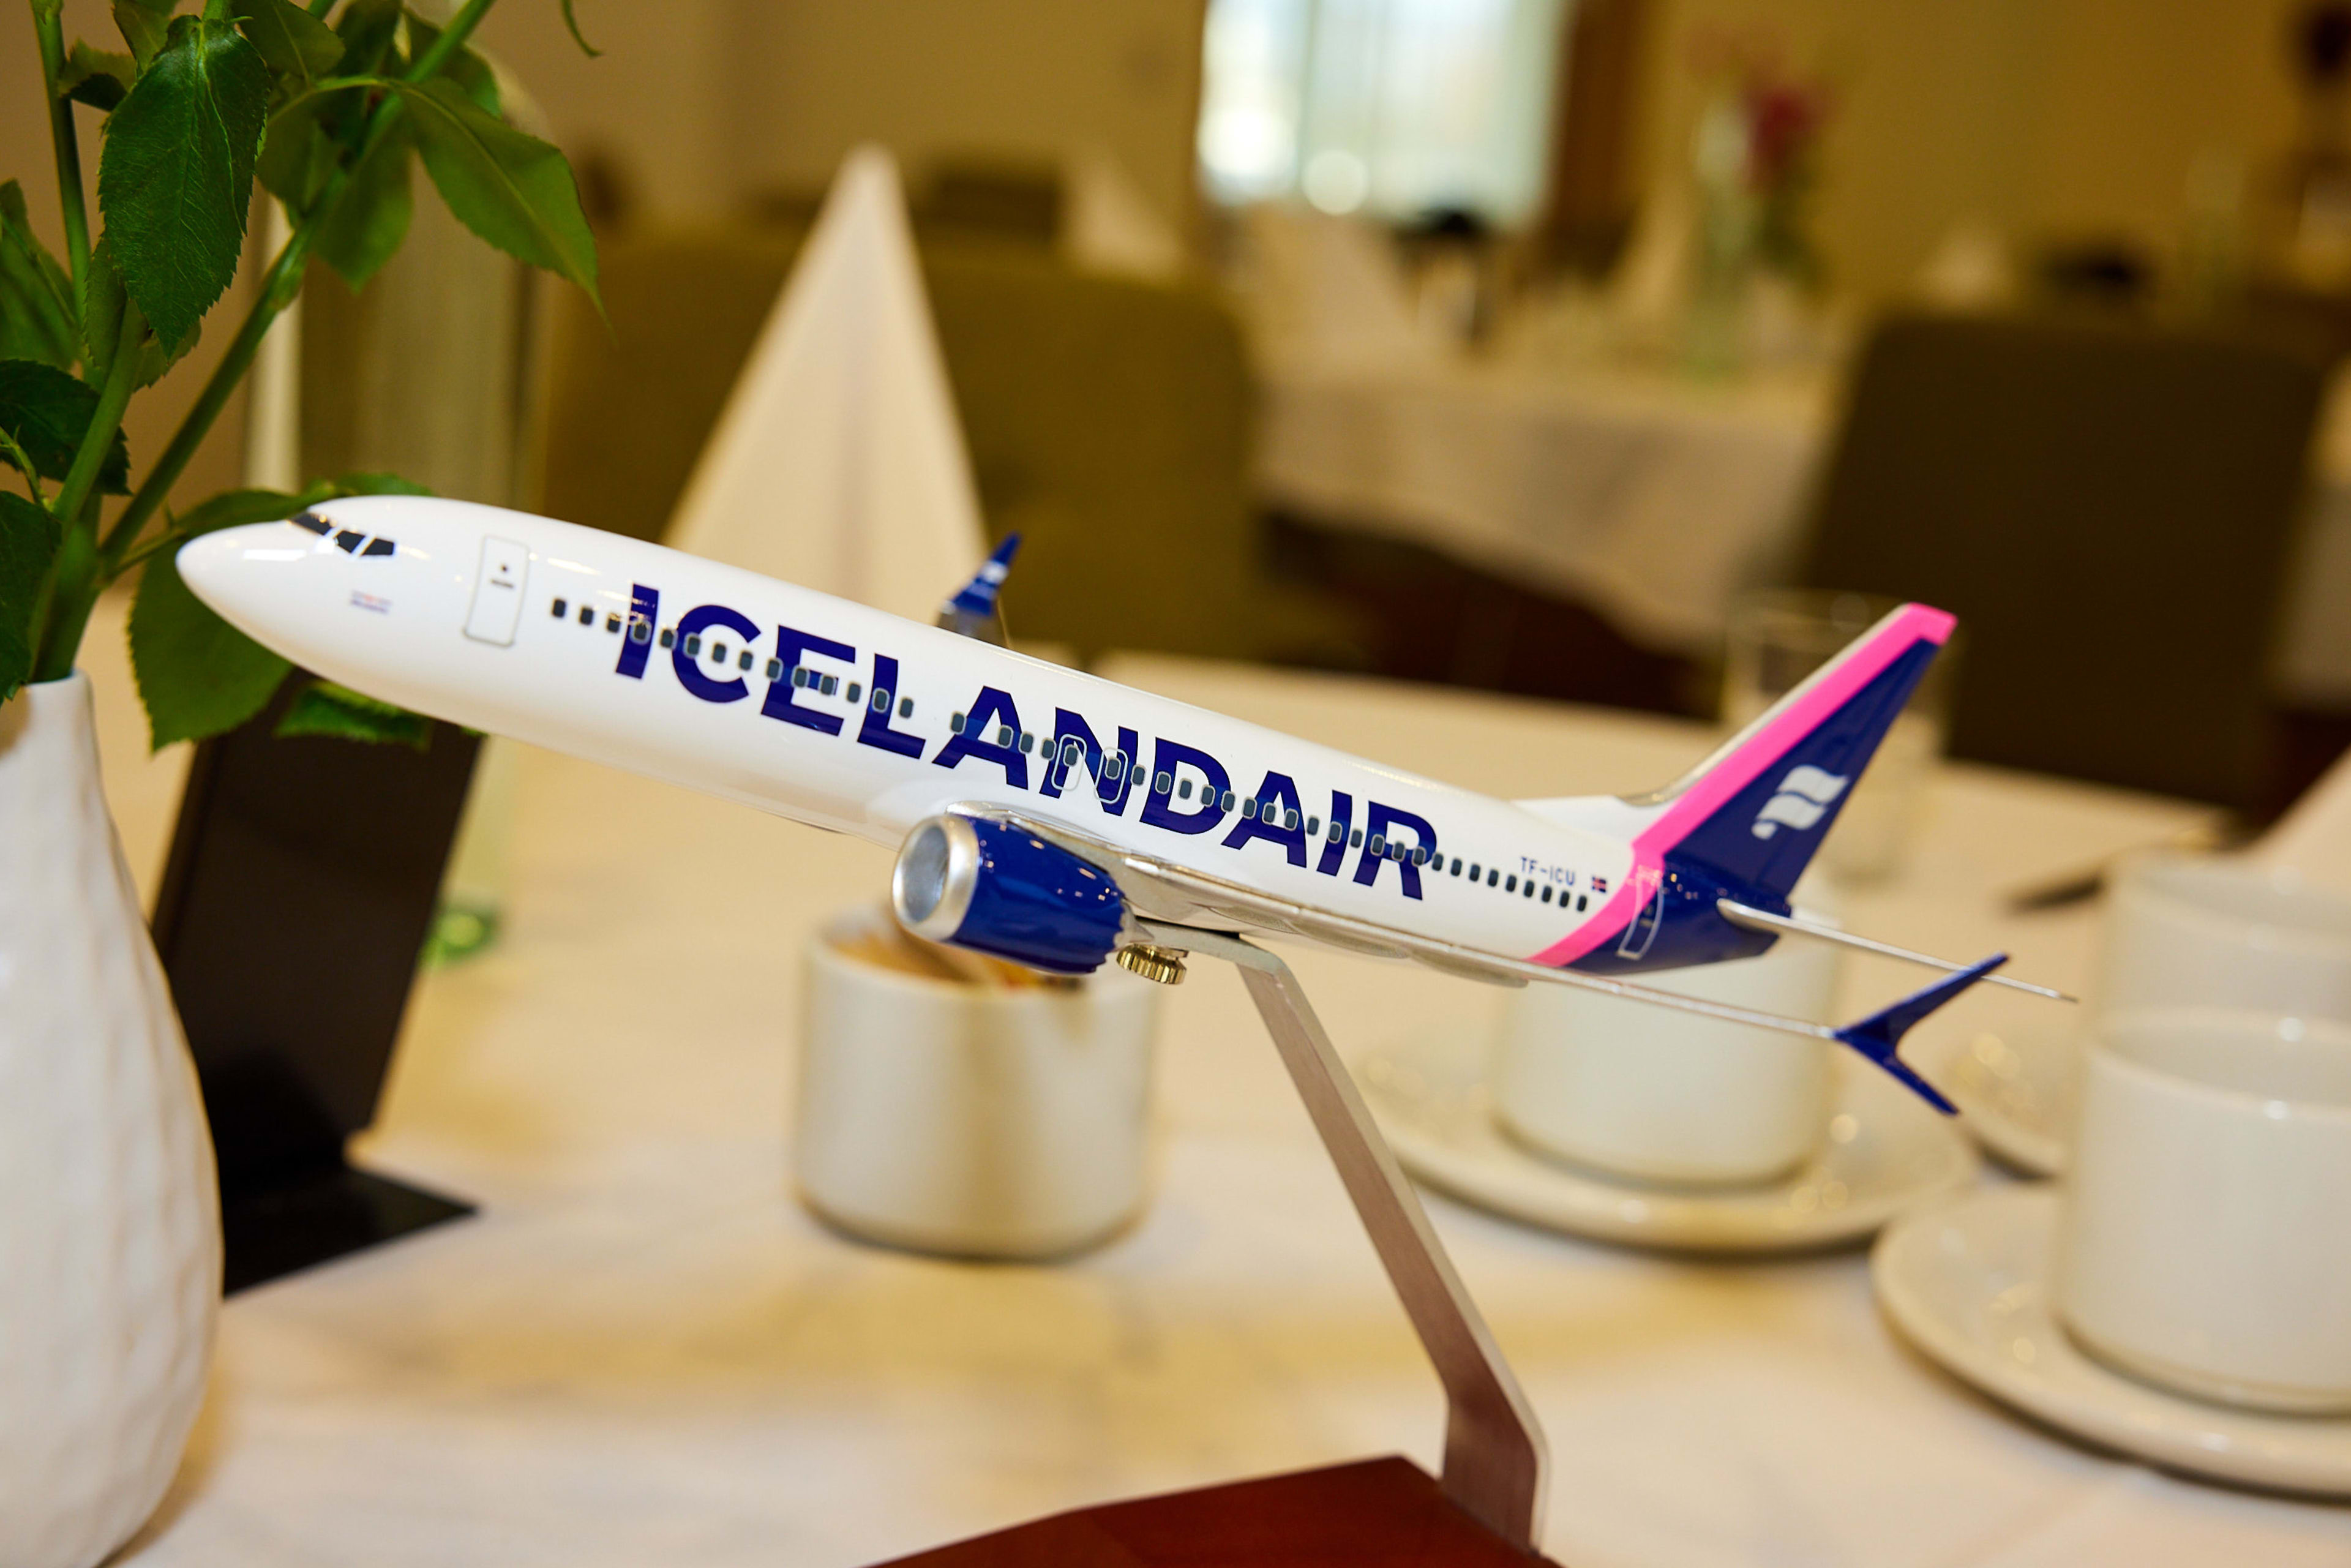 A miniature model of an Icelandair aircraft, in pink and dark blue brand colors.